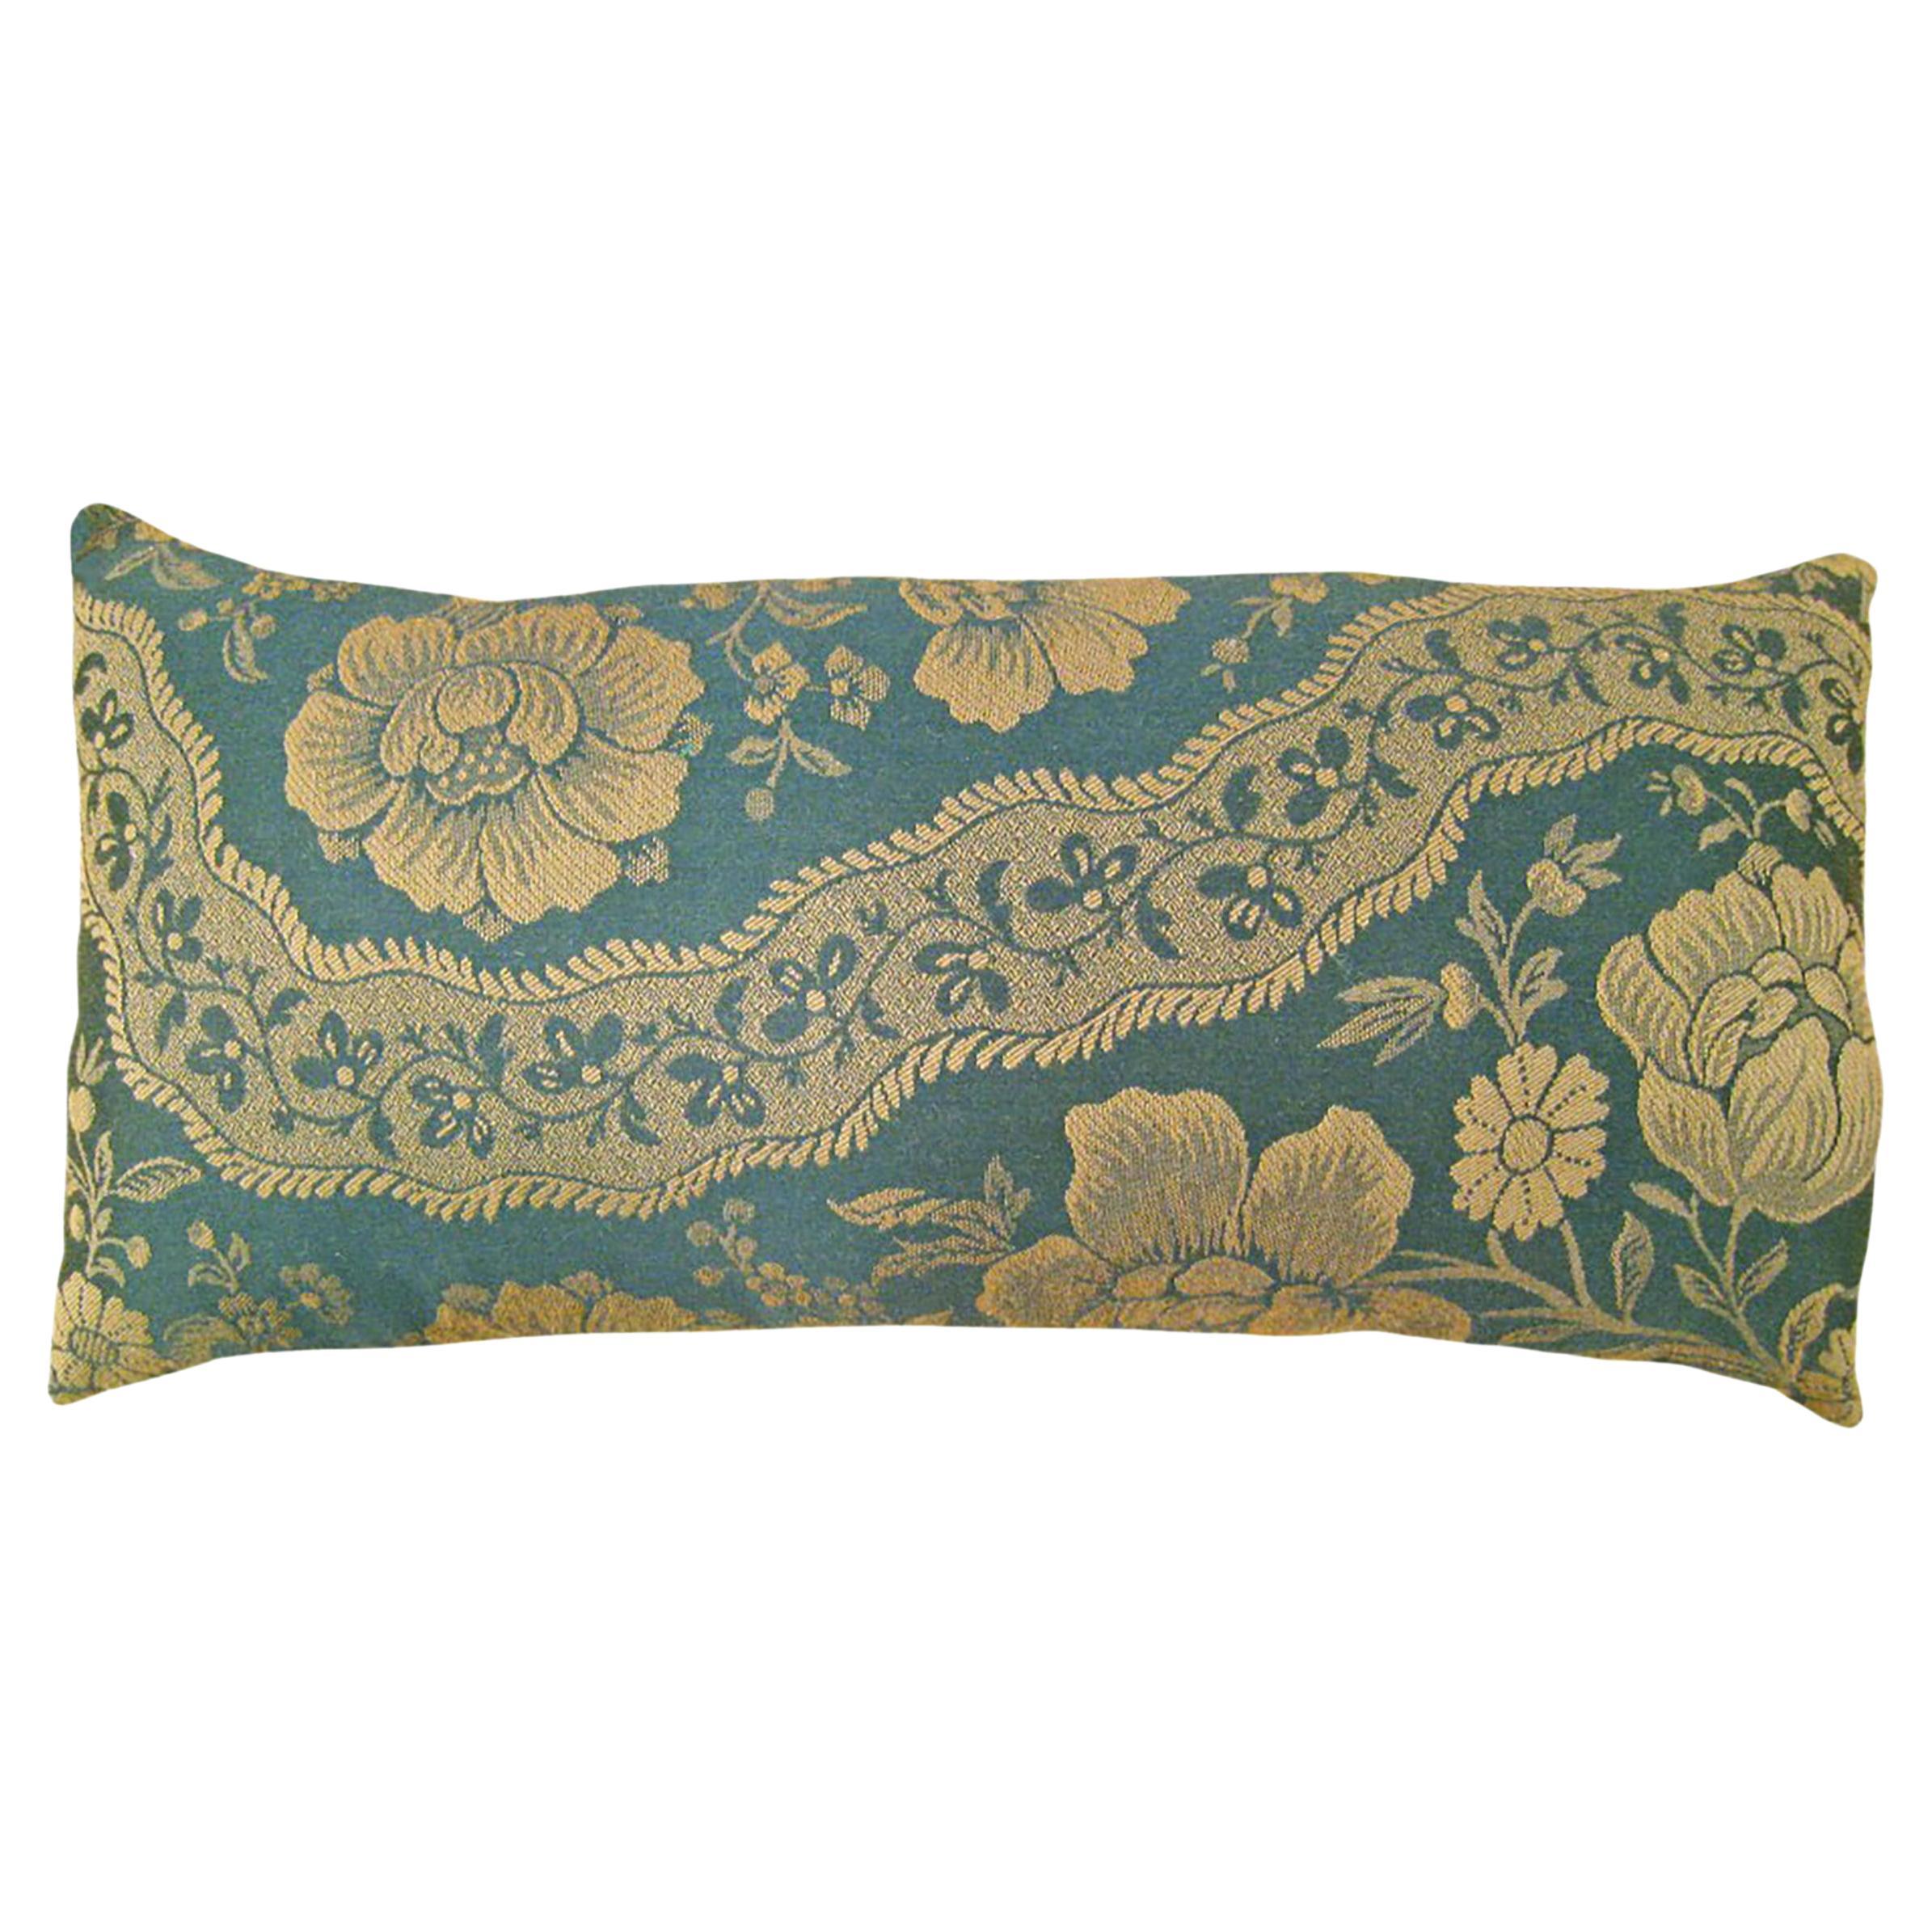 Decorative Vintage European Chinoiserie Fabric Pillow with Floral Design For Sale